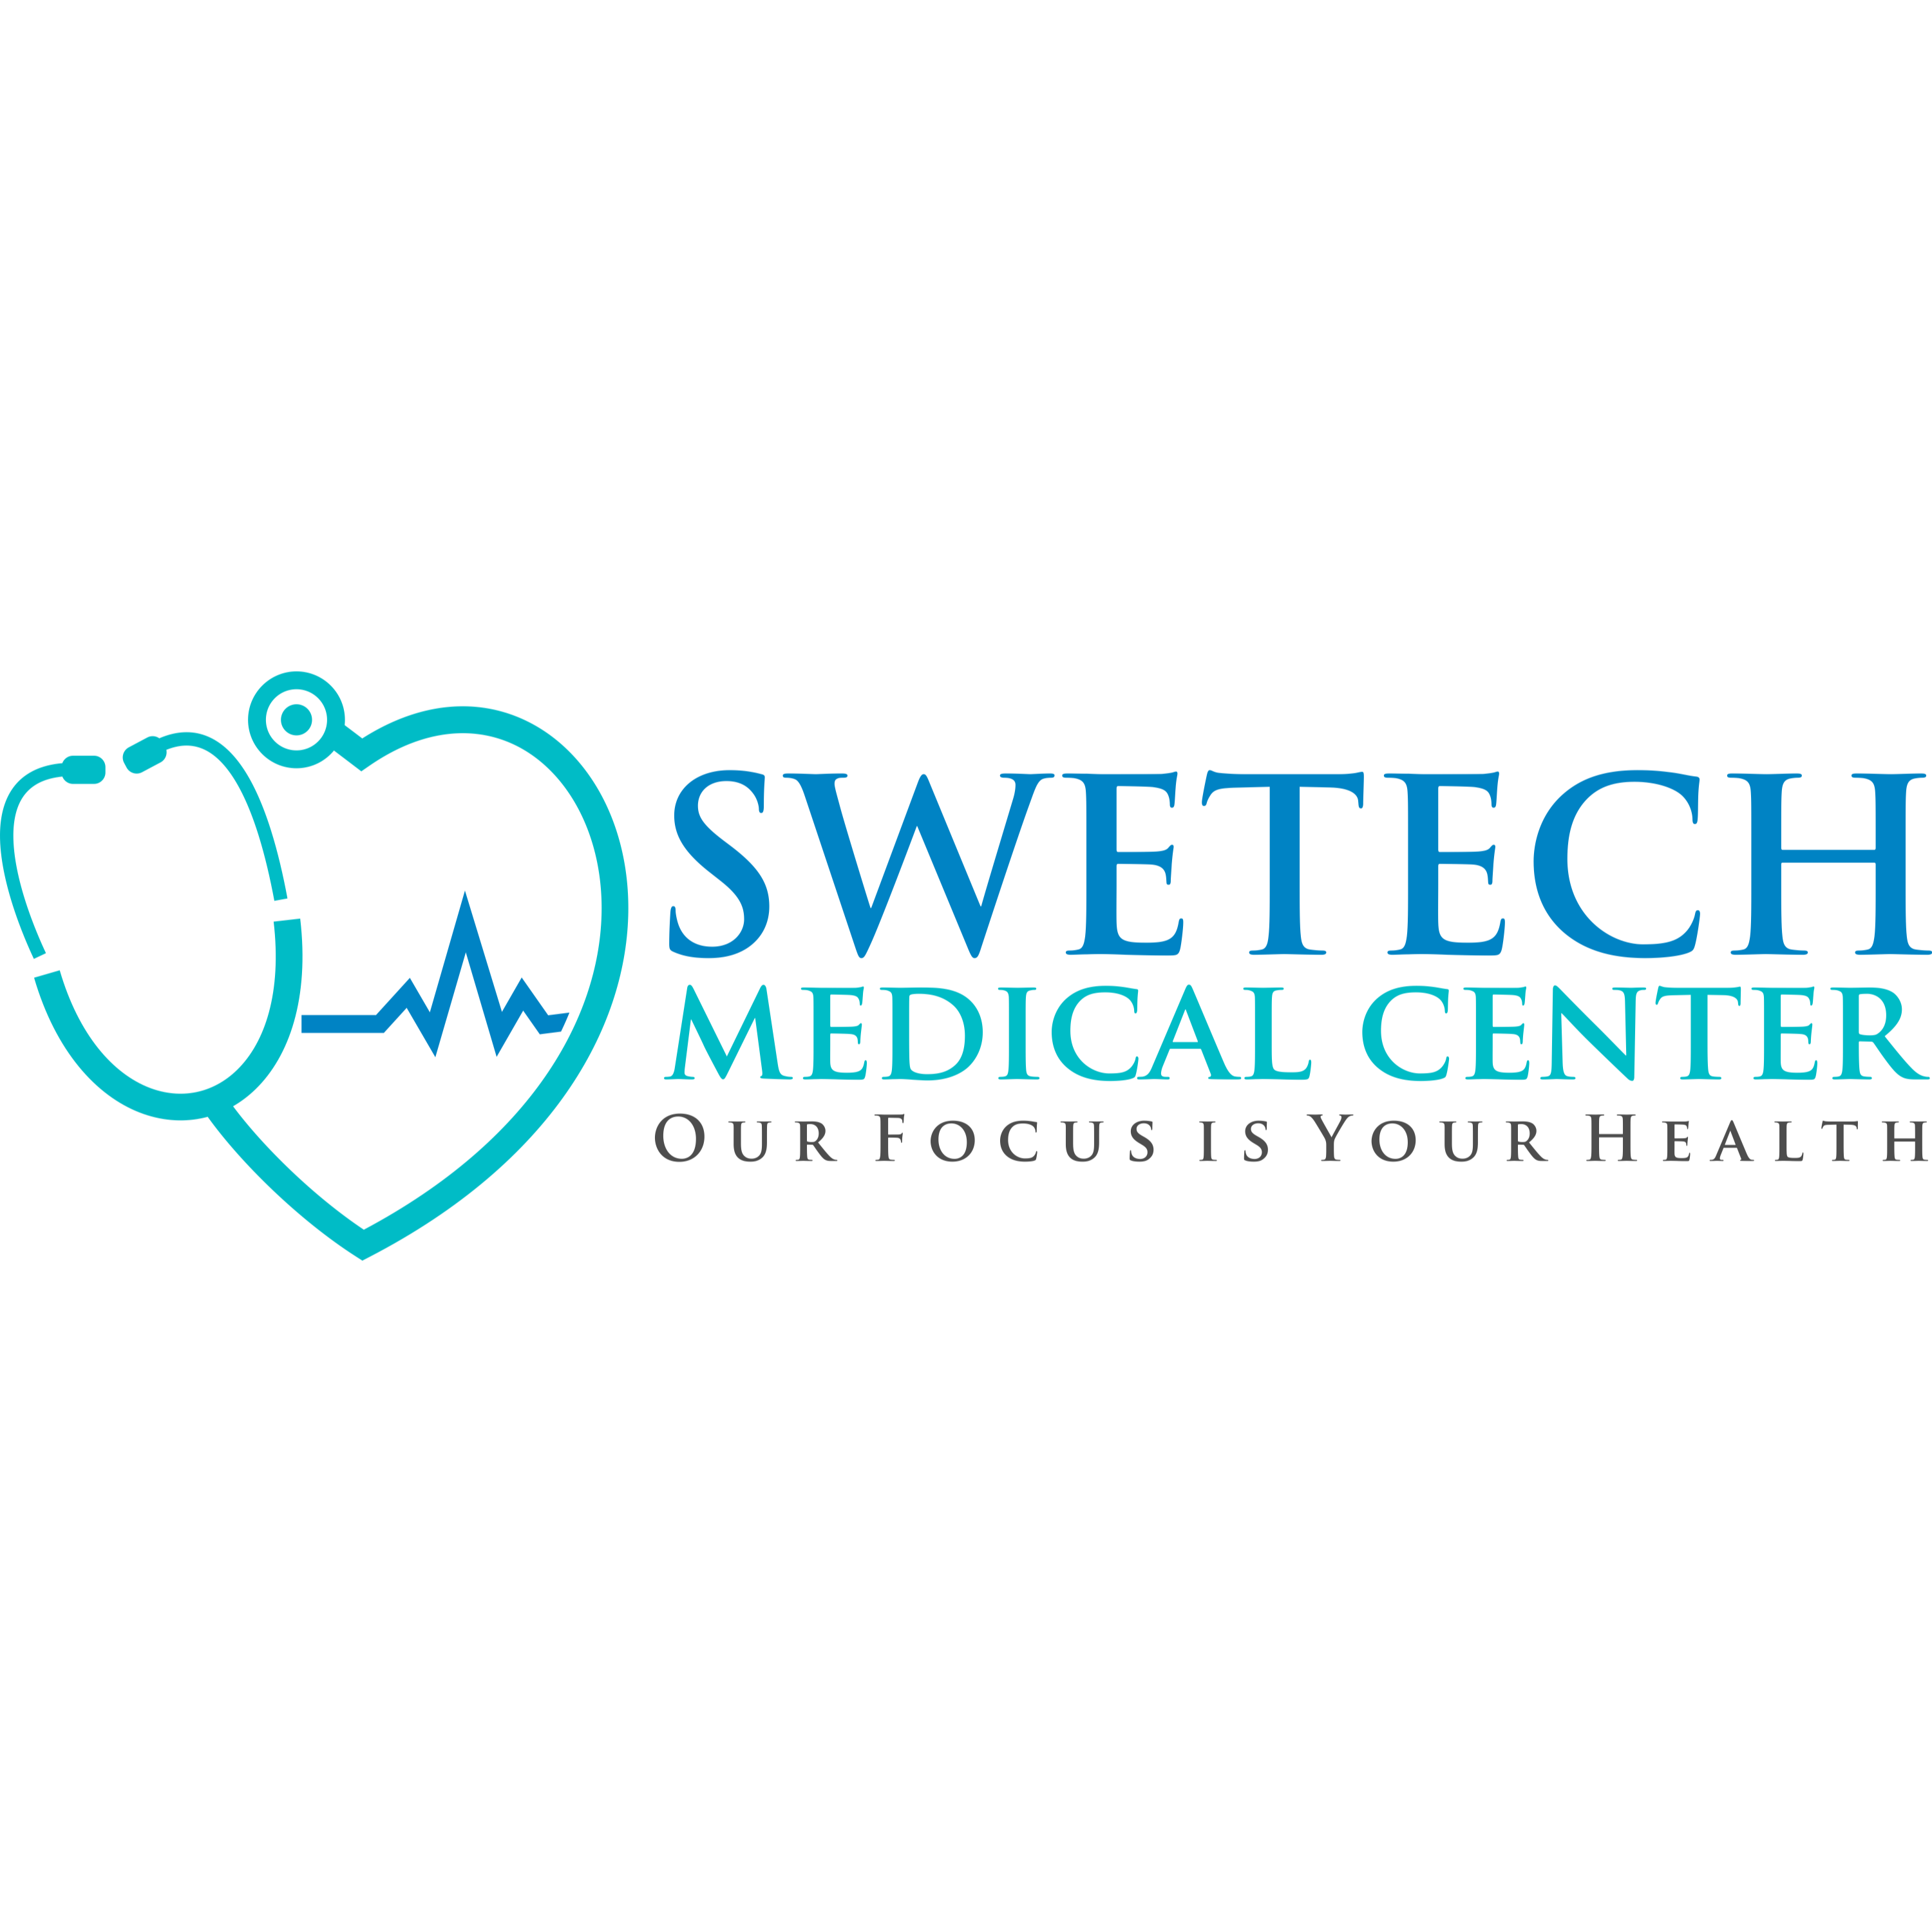 Dr. Maria Swetech - Expert Healthcare Dr. Maria Swetech Clinton Twp (586)228-0400